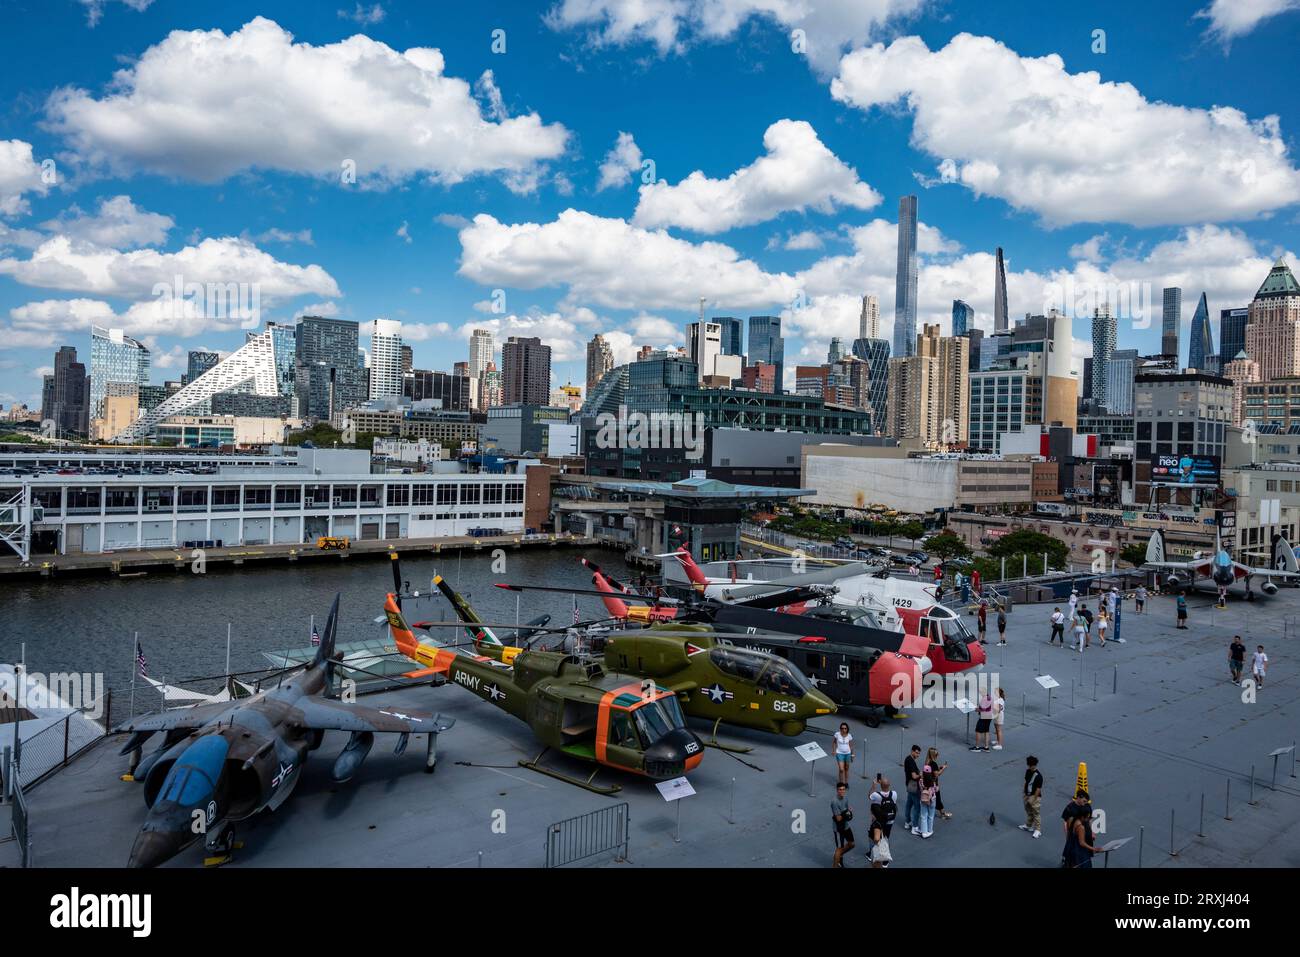 The Intrepid Sea, Air & Space Museum, flight deck with tourist sight seeing. Stock Photo